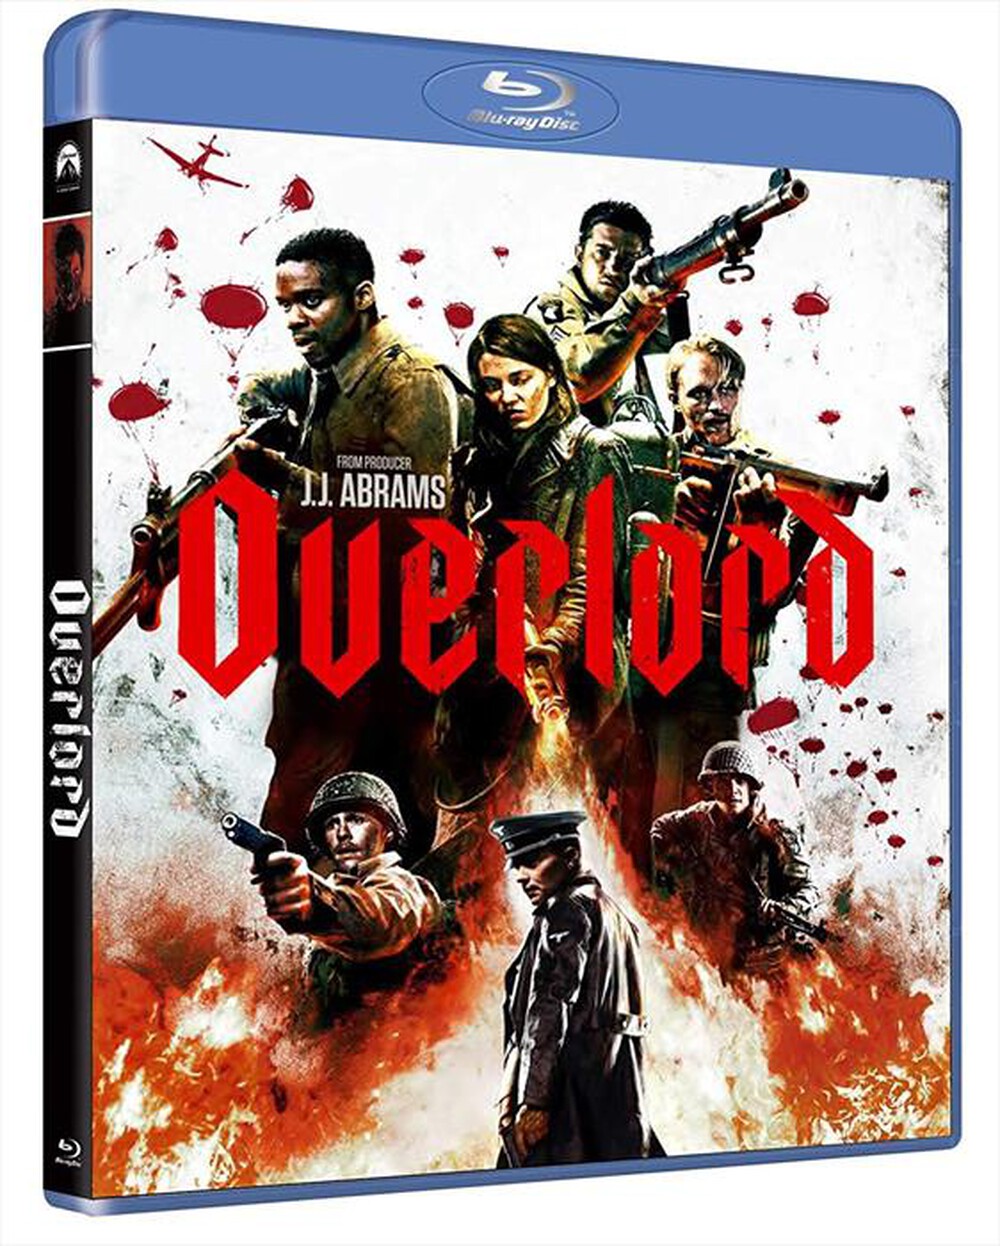 "UNIVERSAL PICTURES - Overlord"